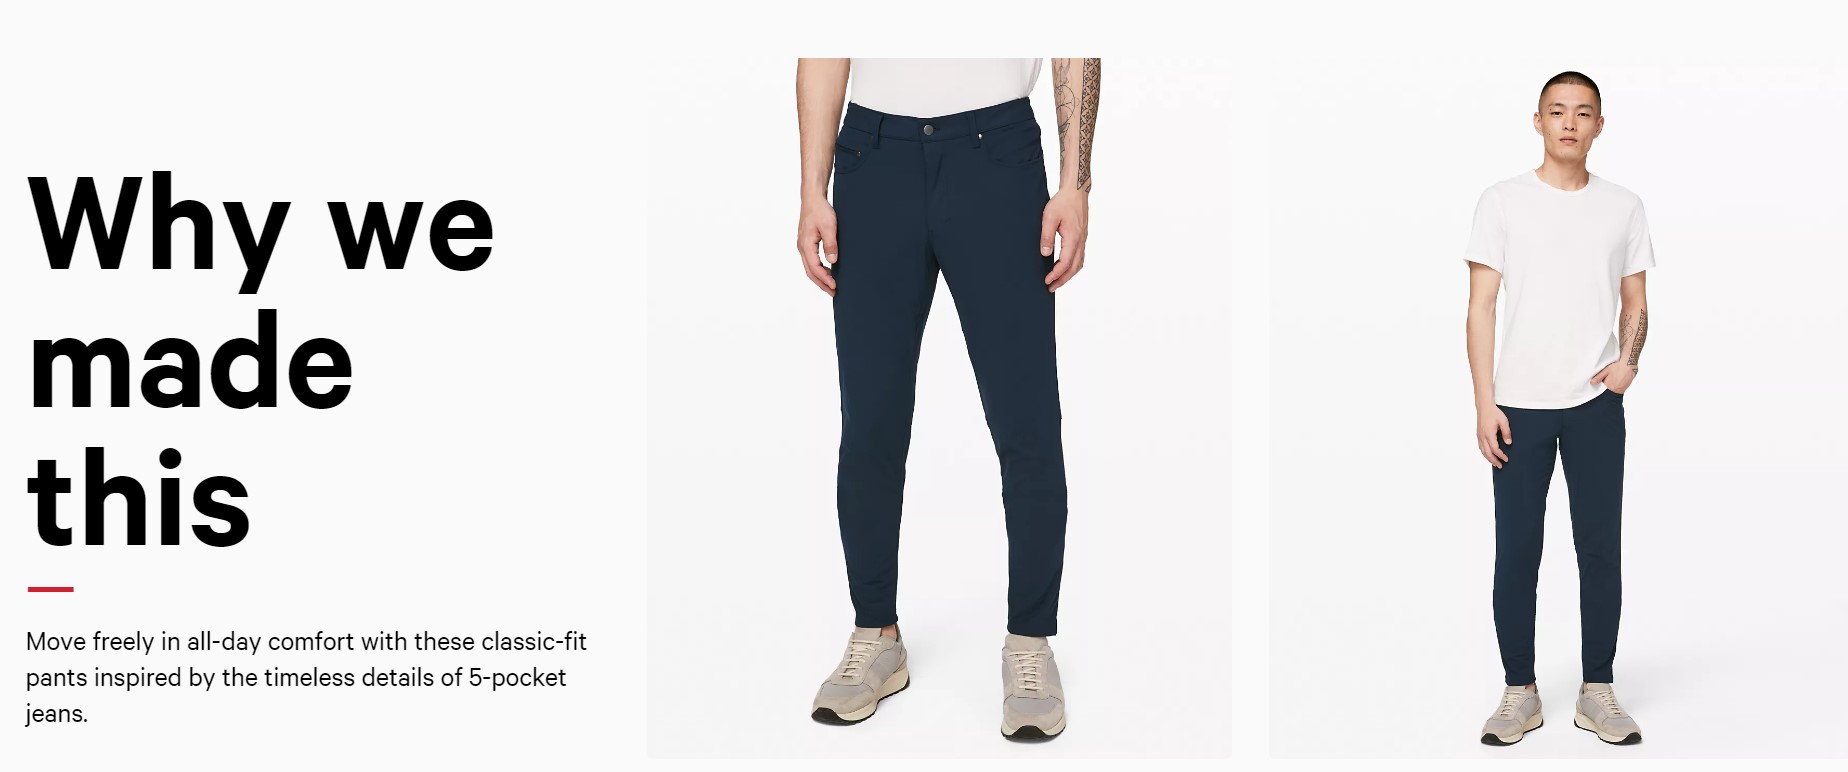 A product detail page on Lululemon's website advertising the ABC Skinny-Fit Pant 34".